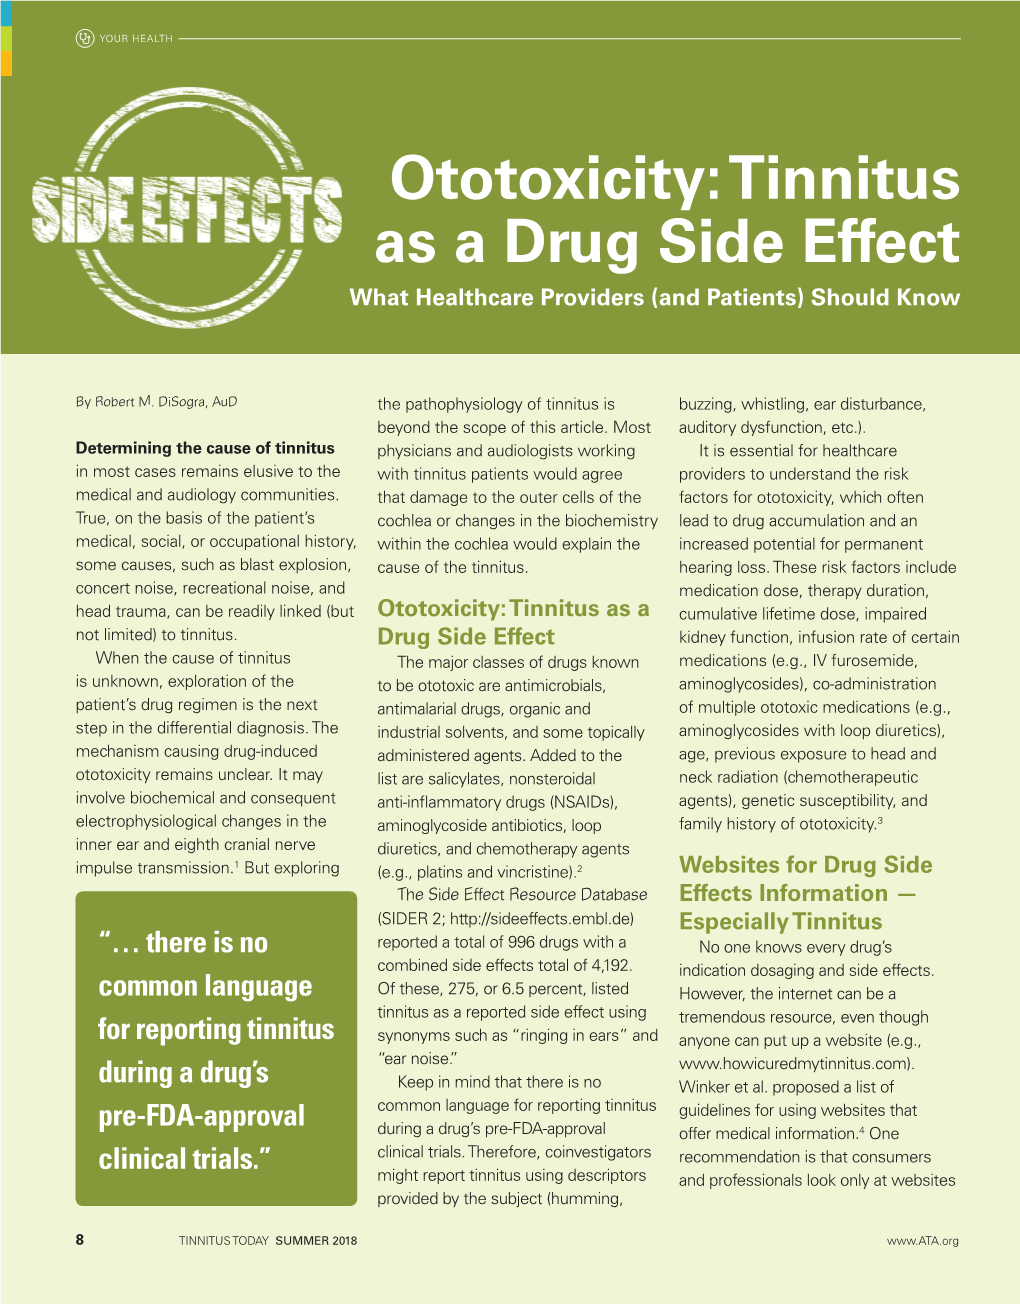 Ototoxicity: Tinnitus As a Drug Side Effect What Healthcare Providers (And Patients) Should Know